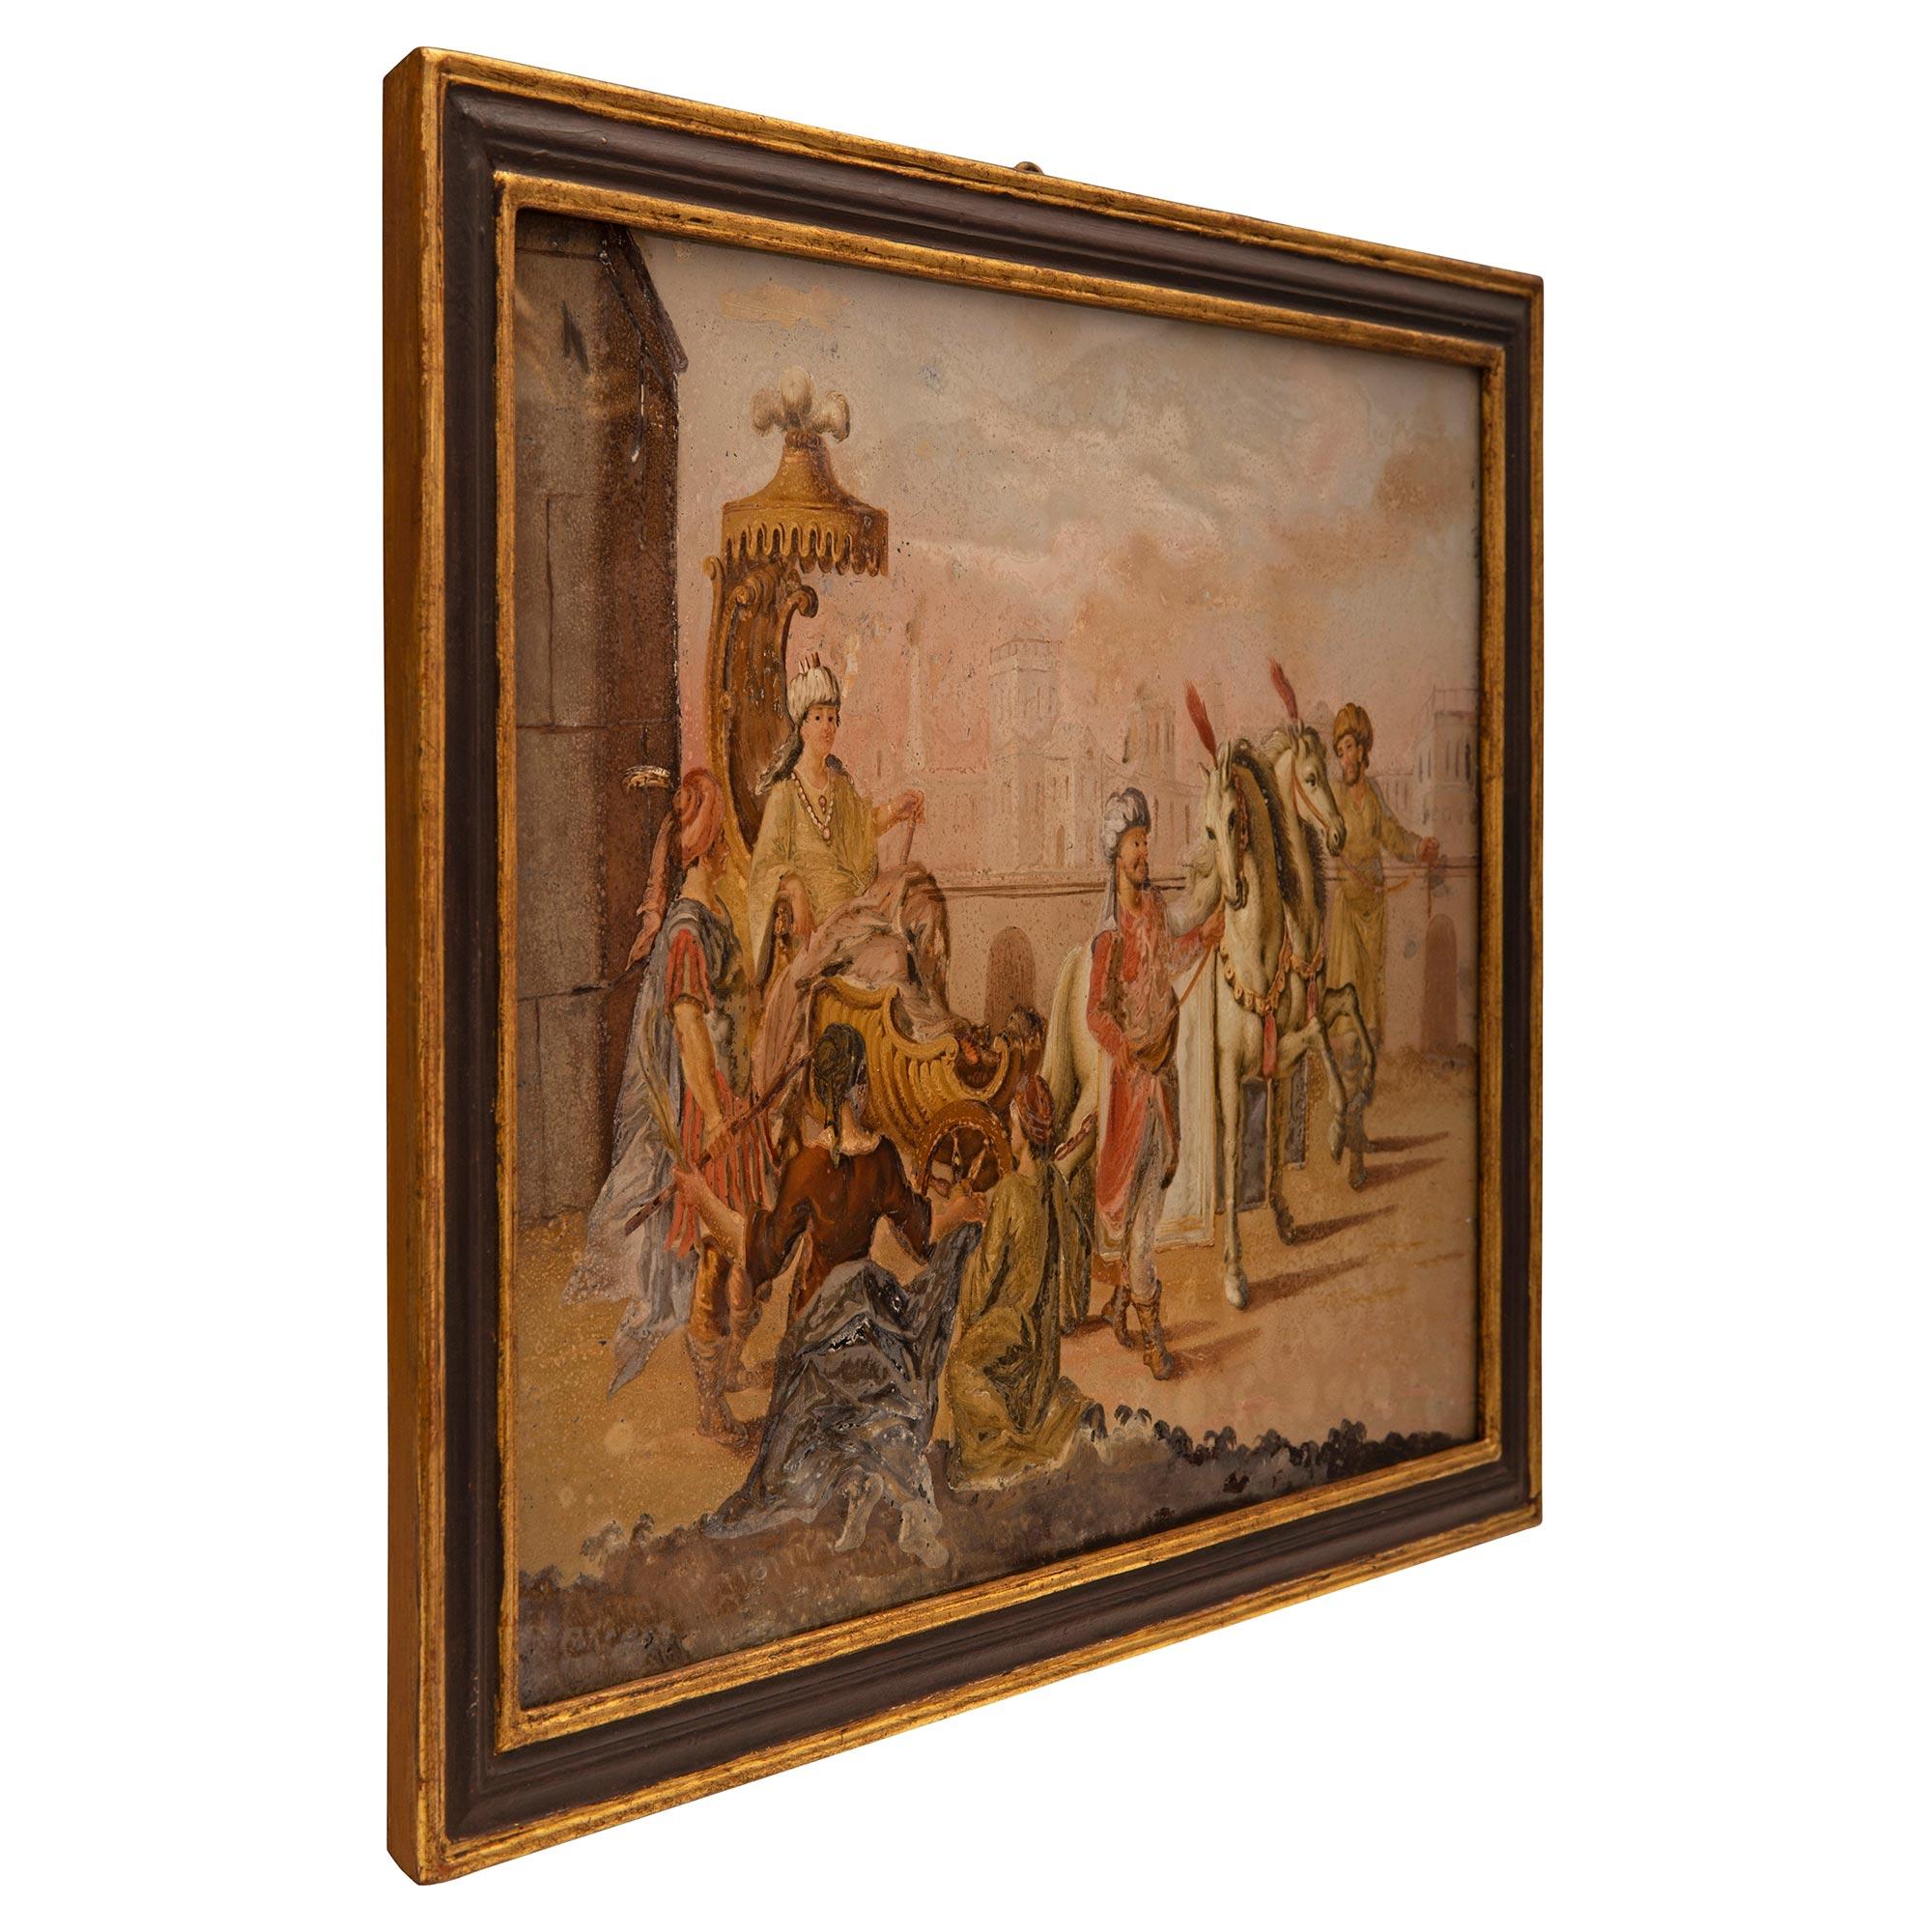 A superb Italian 18th century reverse painted on glass painting in its original frame. The painting is set within its original and most elegant polychrome and giltwood frame with a fine mottled design. The painting depicts a celebration of a